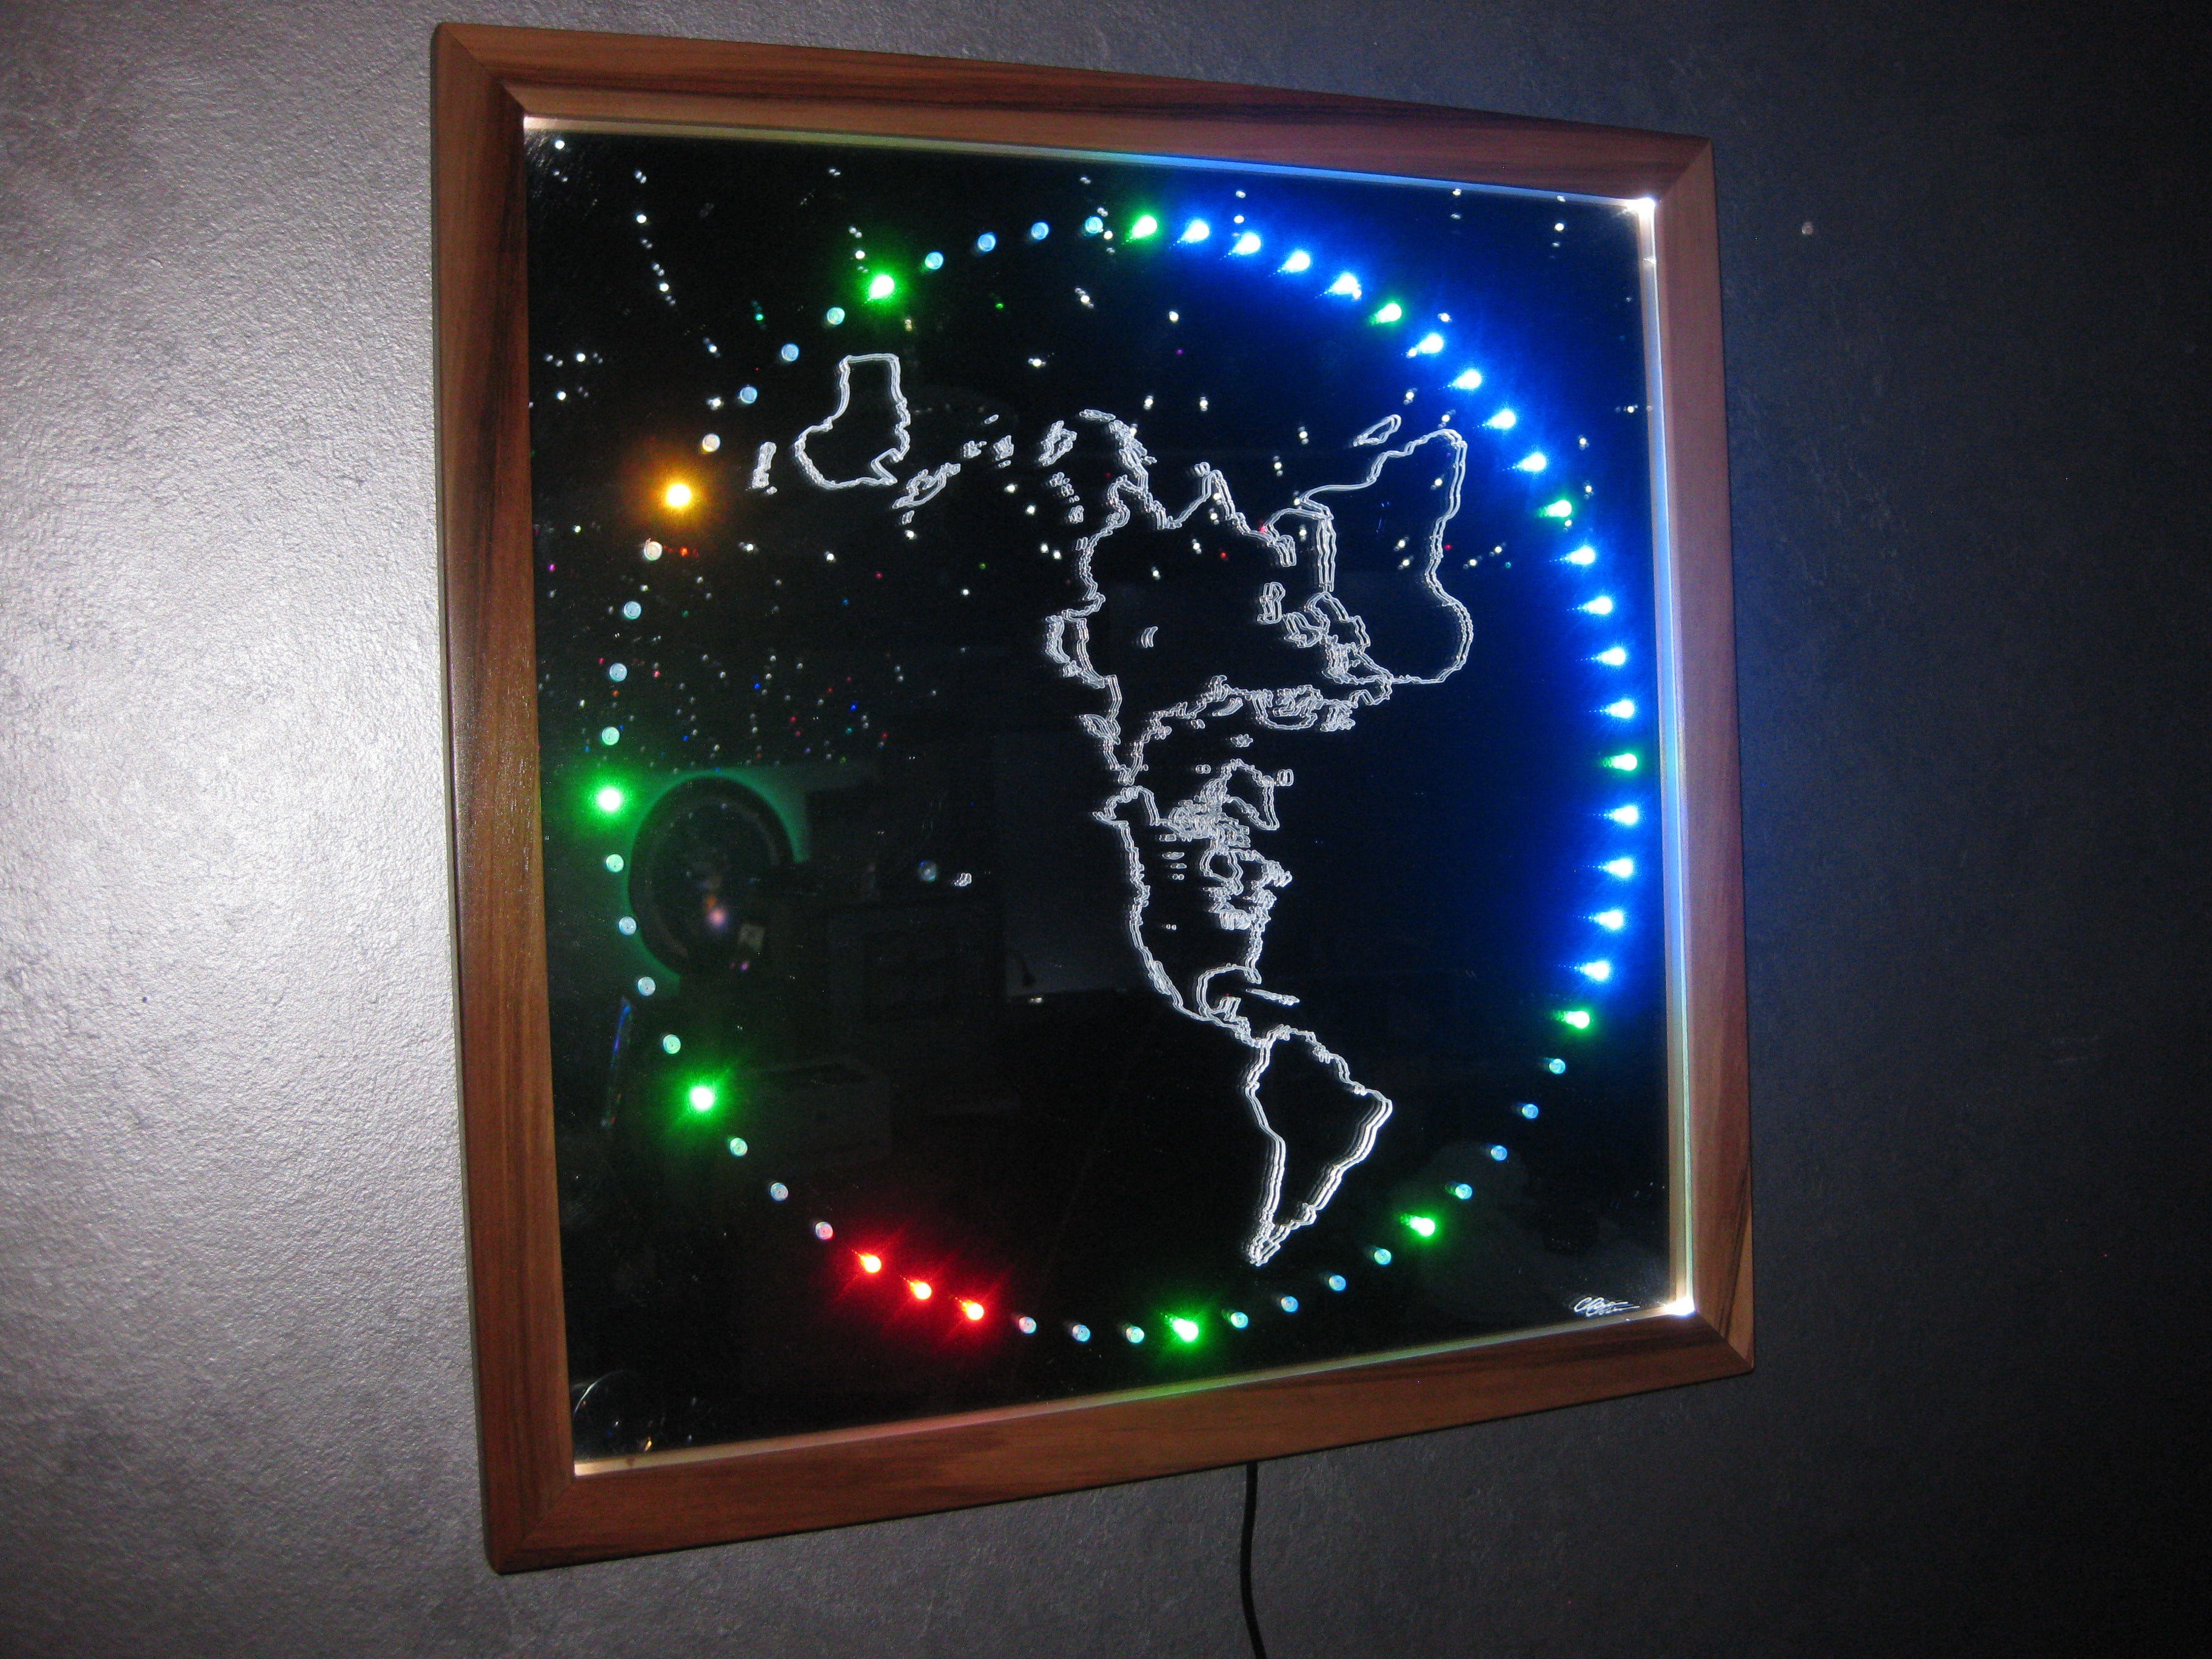 LED "handless" mirror ring clock with lighted FE map image